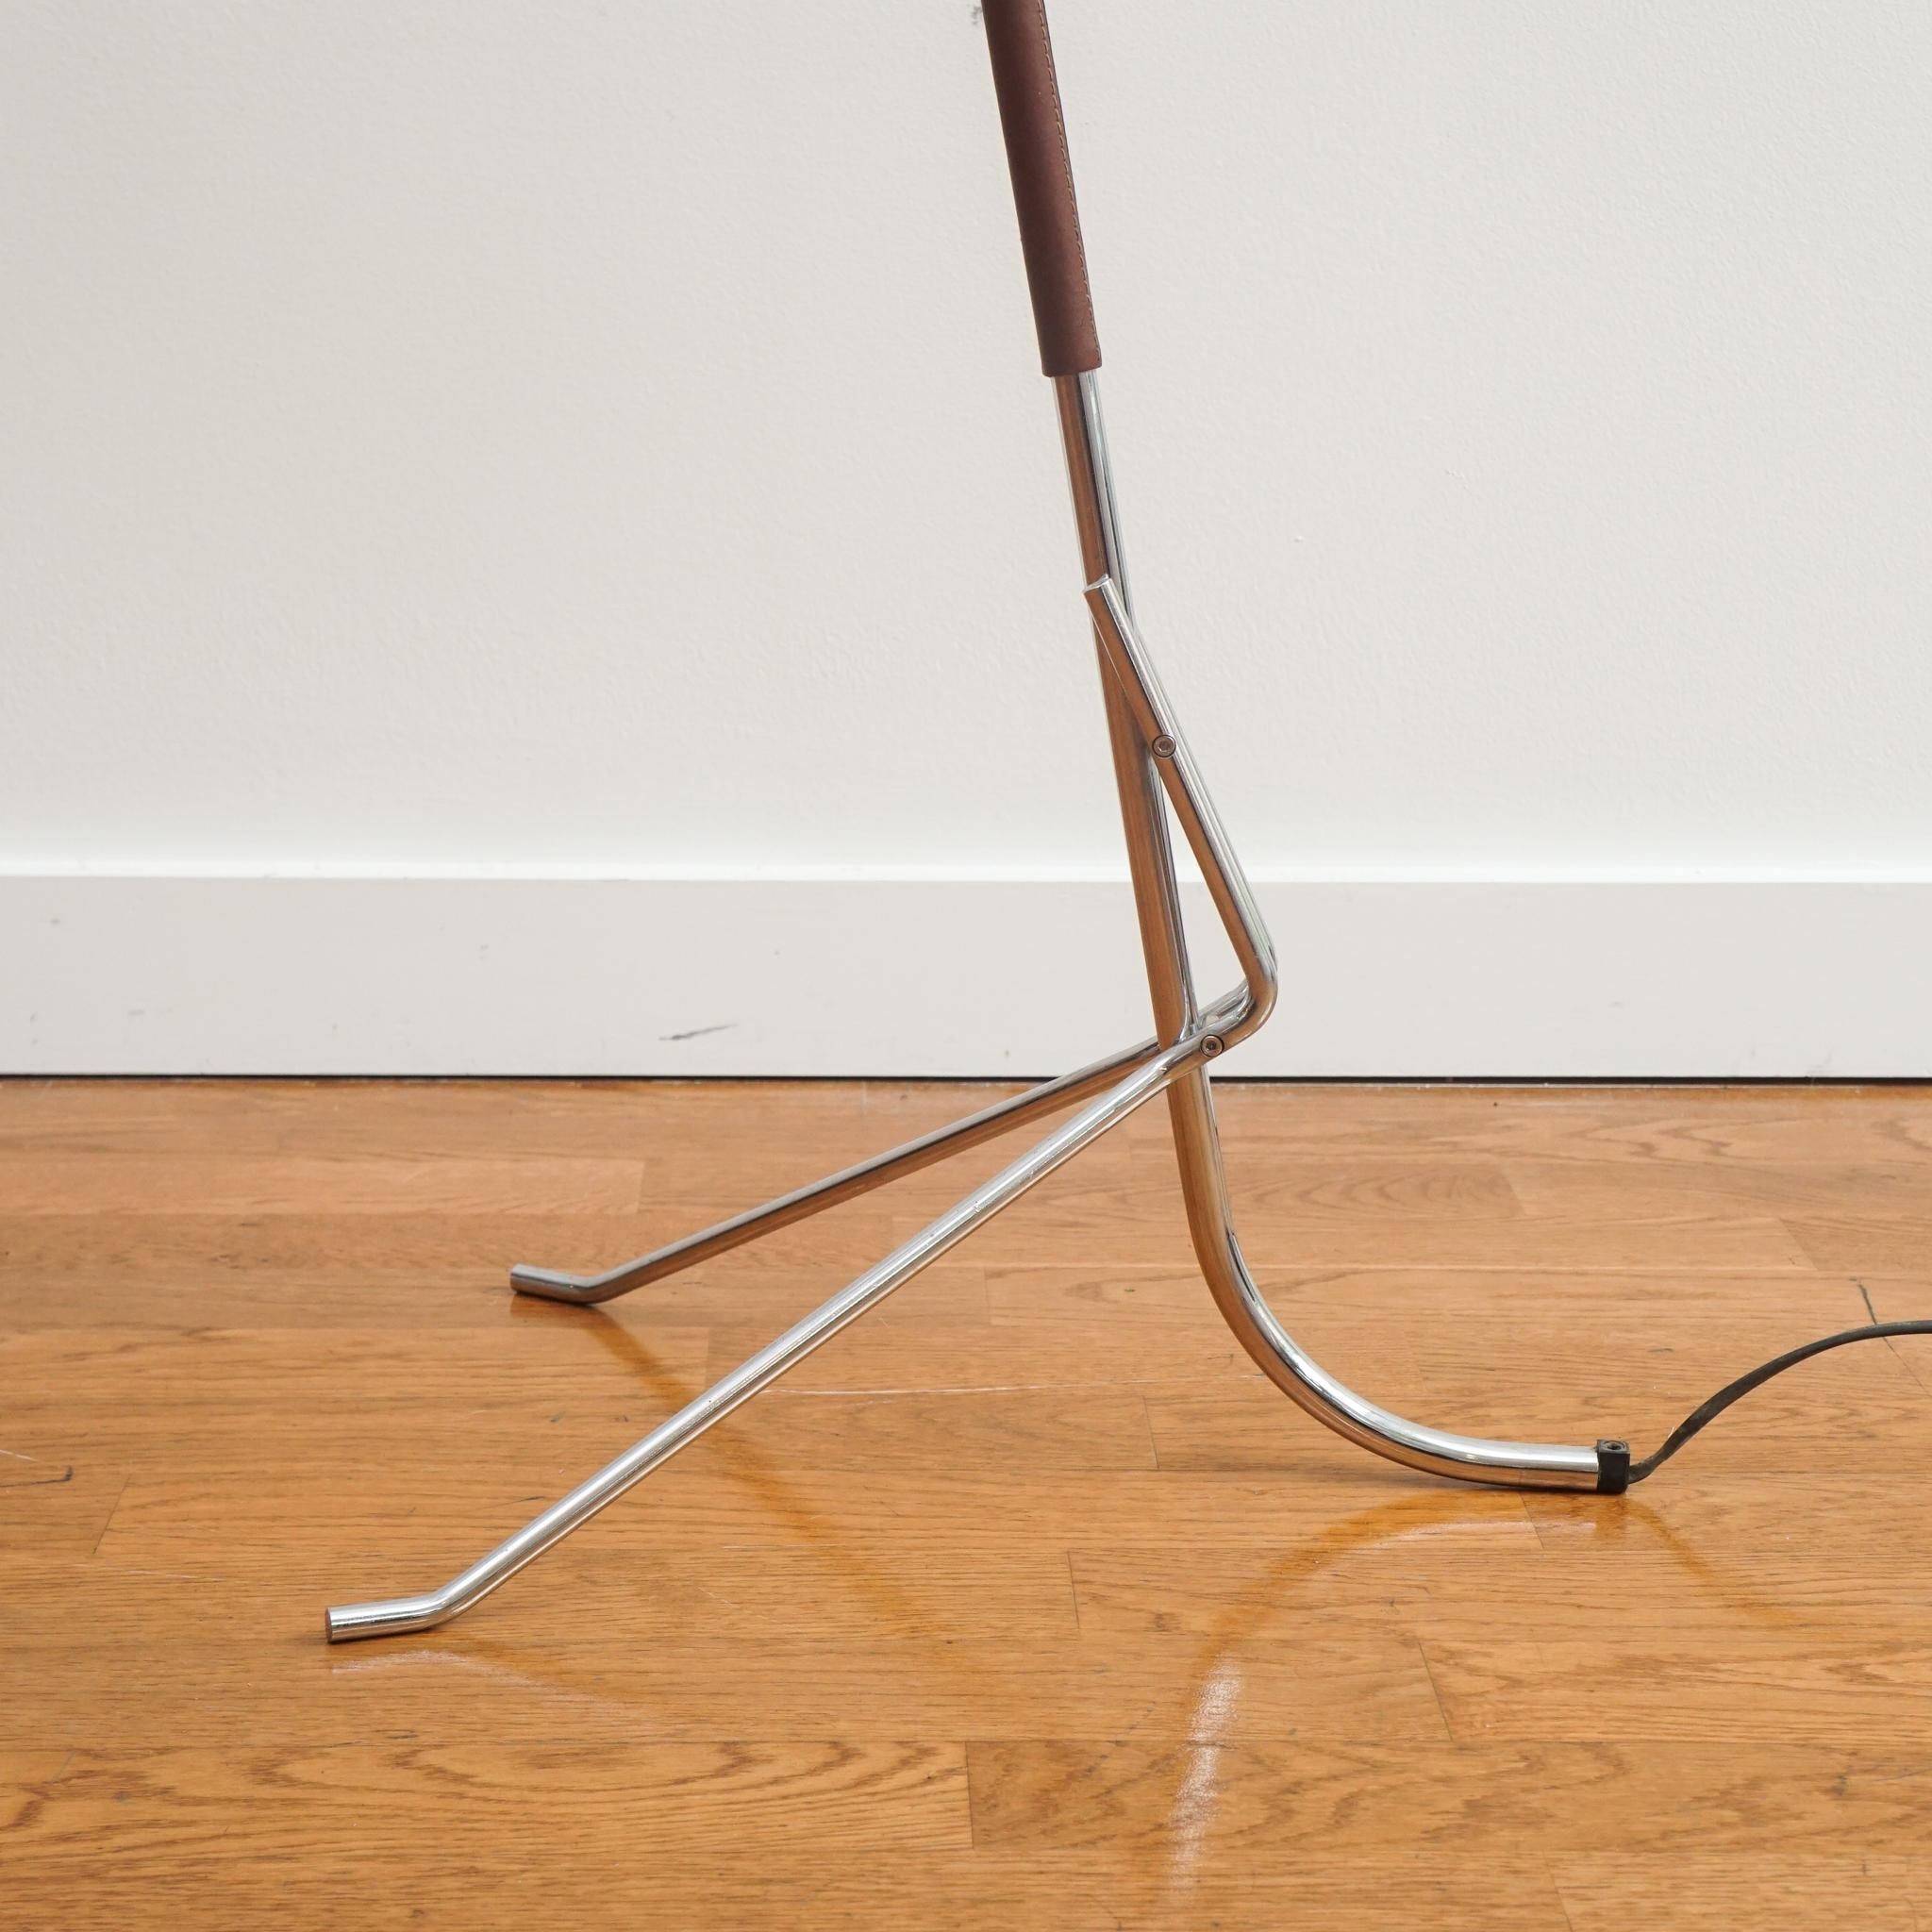 Machine-Made Vintage Chrome and Leather Floor Lamp with Tripod Base